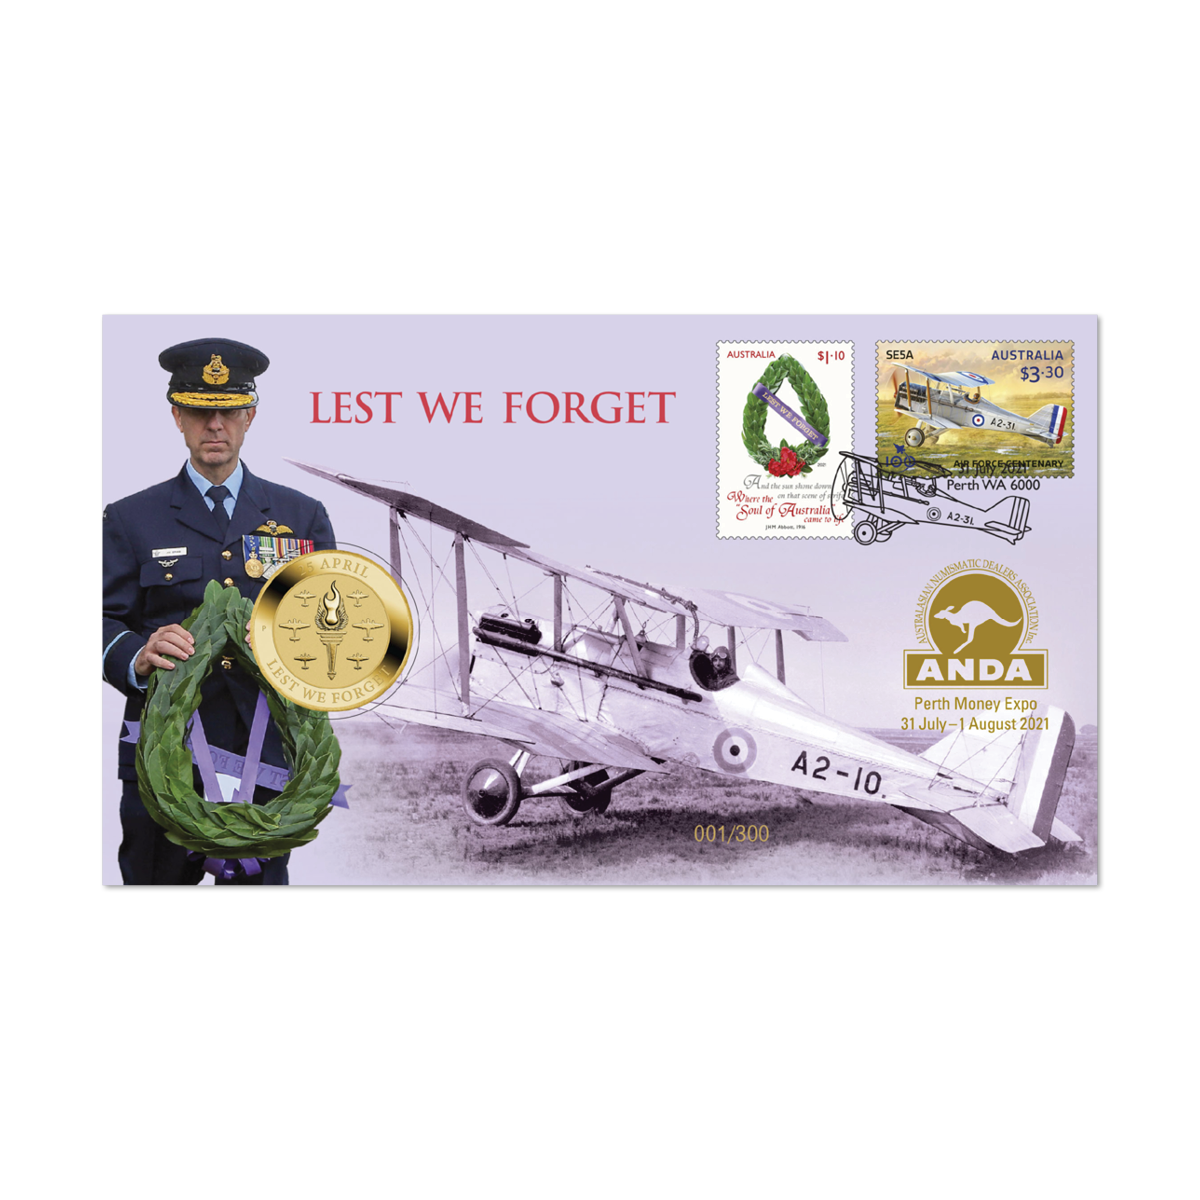 Perth Money Expo 2021 $1 Lest We Forget RAAF Centenary Stamp & Coin Cover